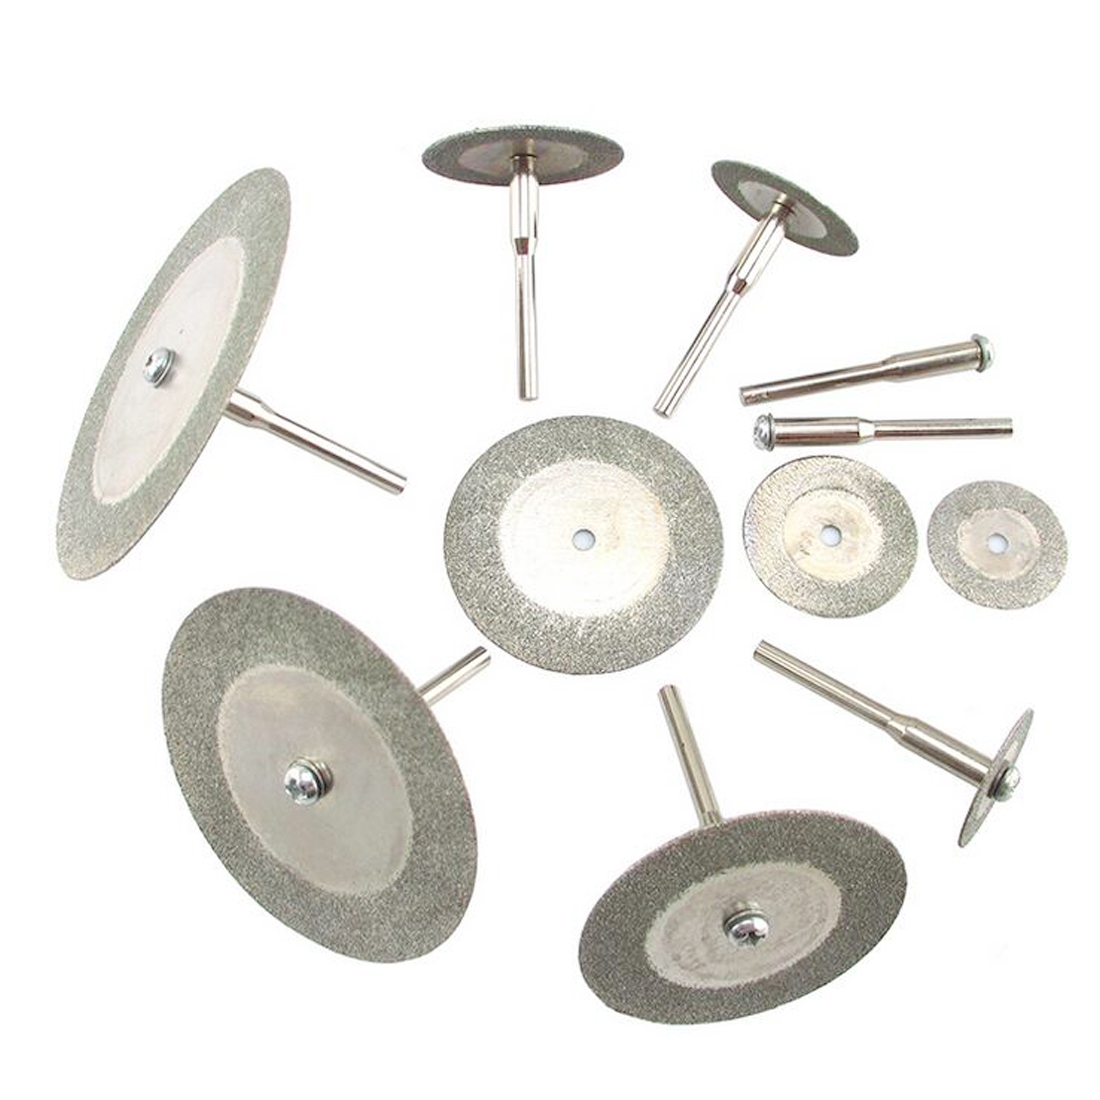 When you decide to purchase some diamond saw blades, you are not quite sure whether it will be applied effectively to the material you need to cut?